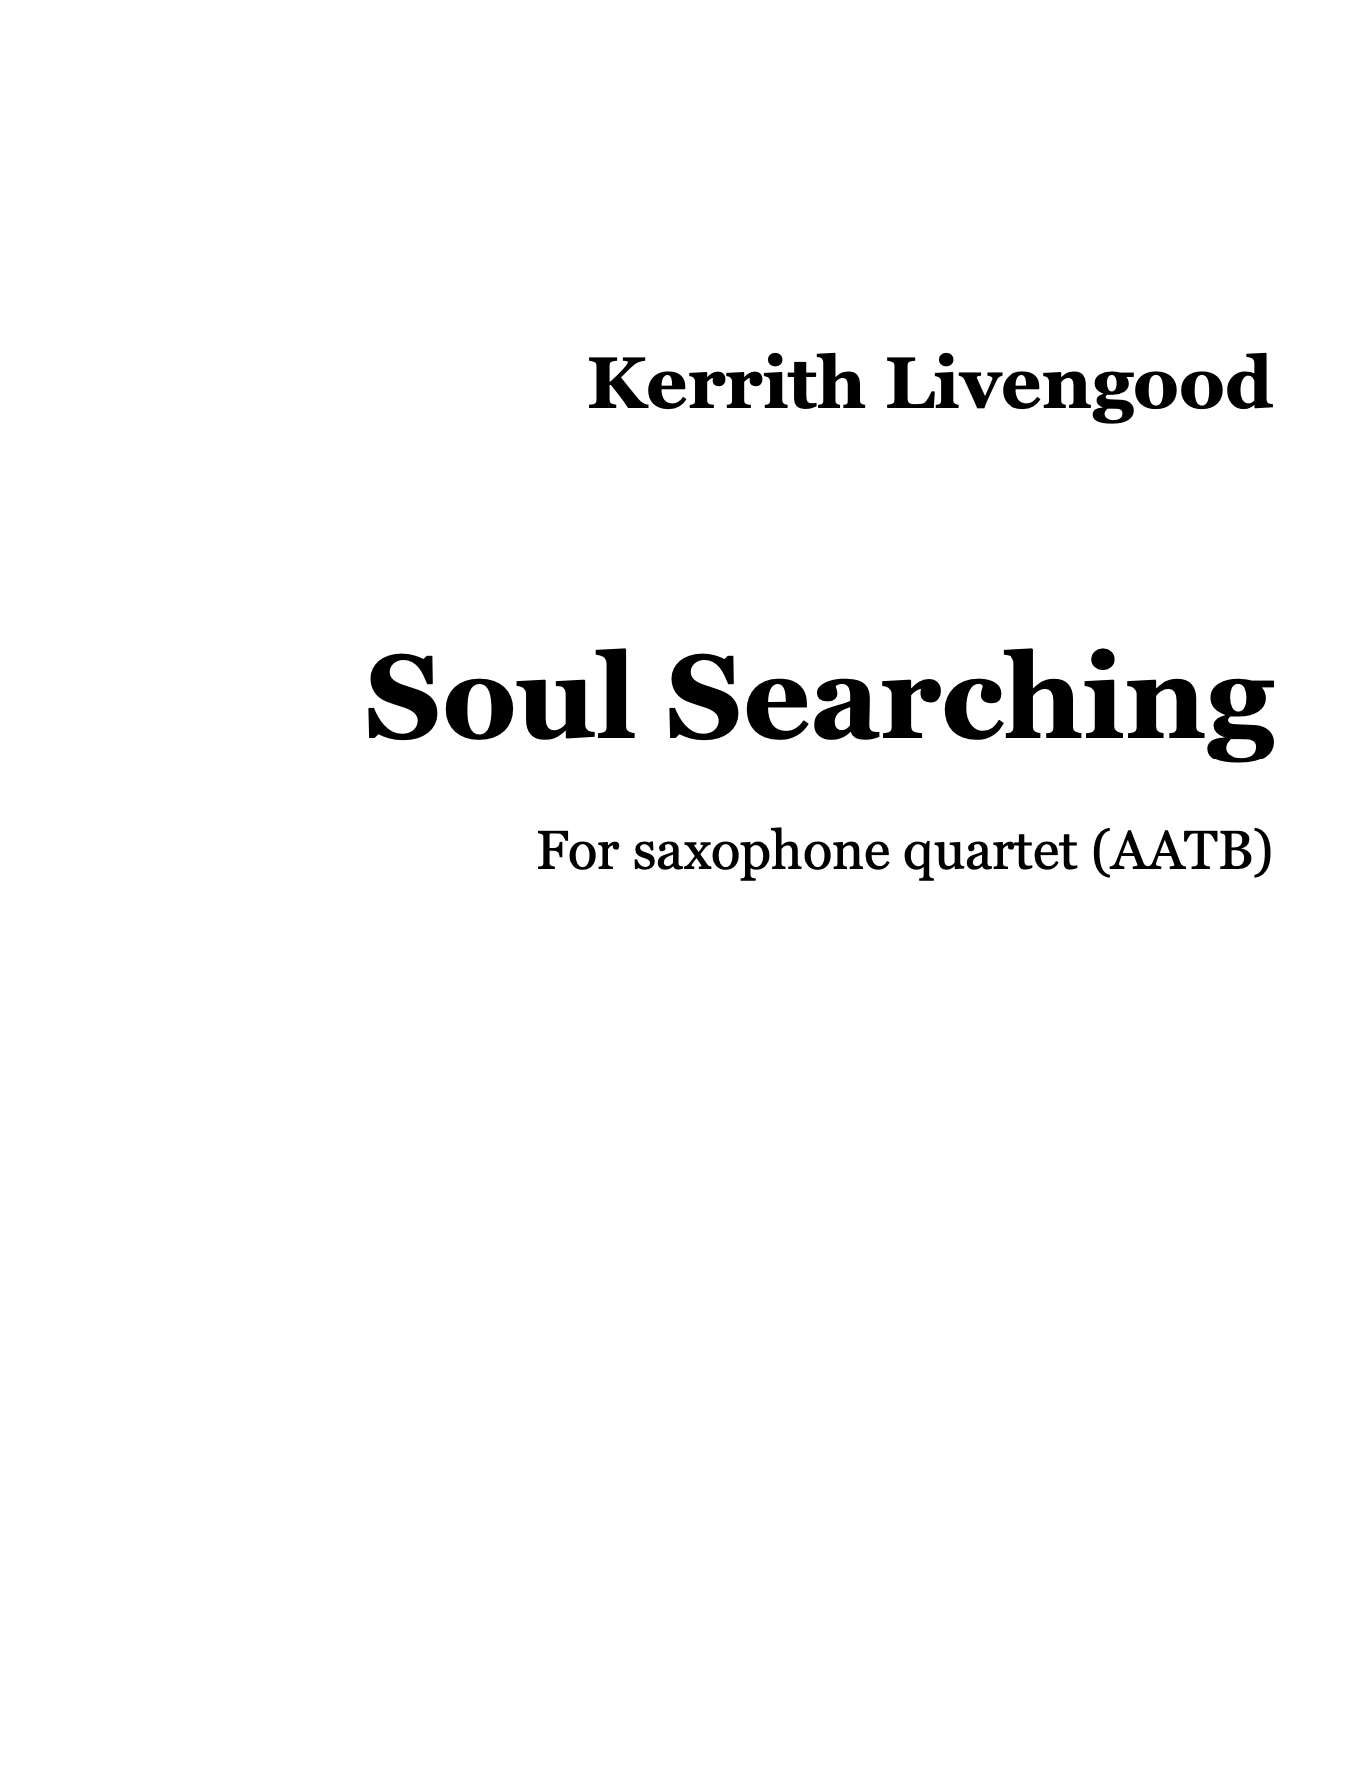 Soul Searching by Kerrith Livengood